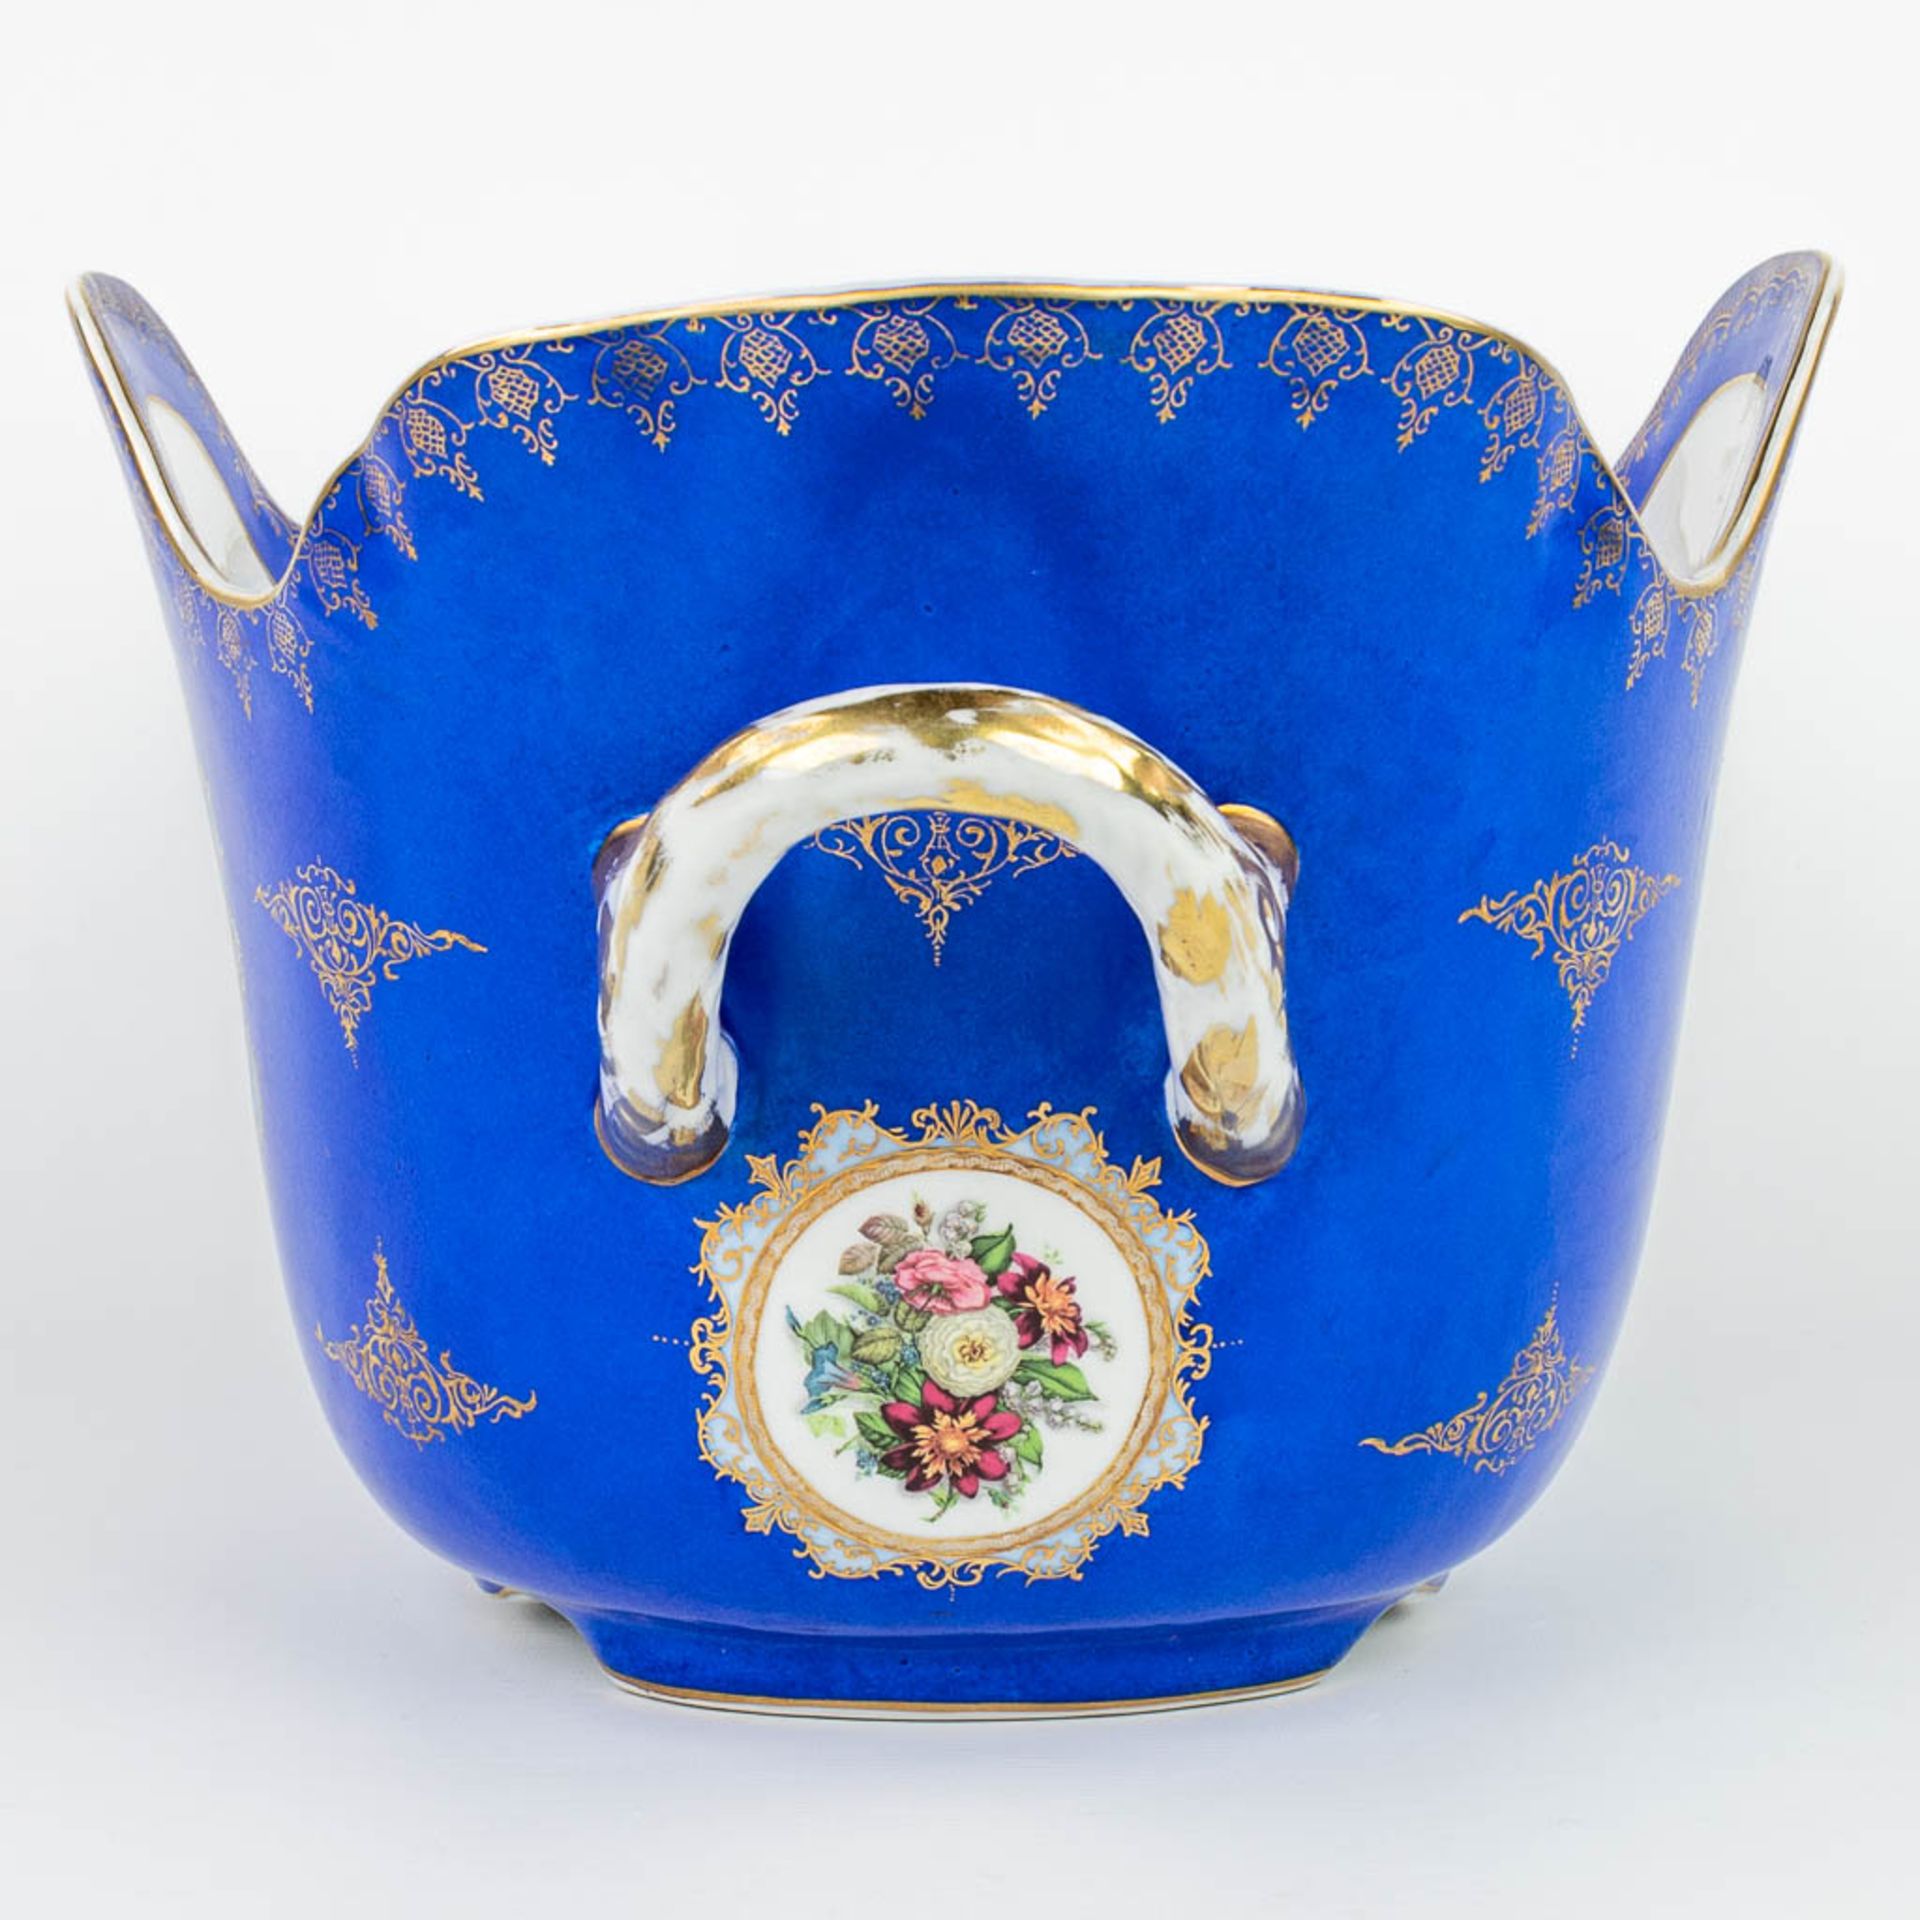 A large wine cooler made of porcelain with flower decor and marked with the Meissener logo. (H:28cm) - Image 8 of 13